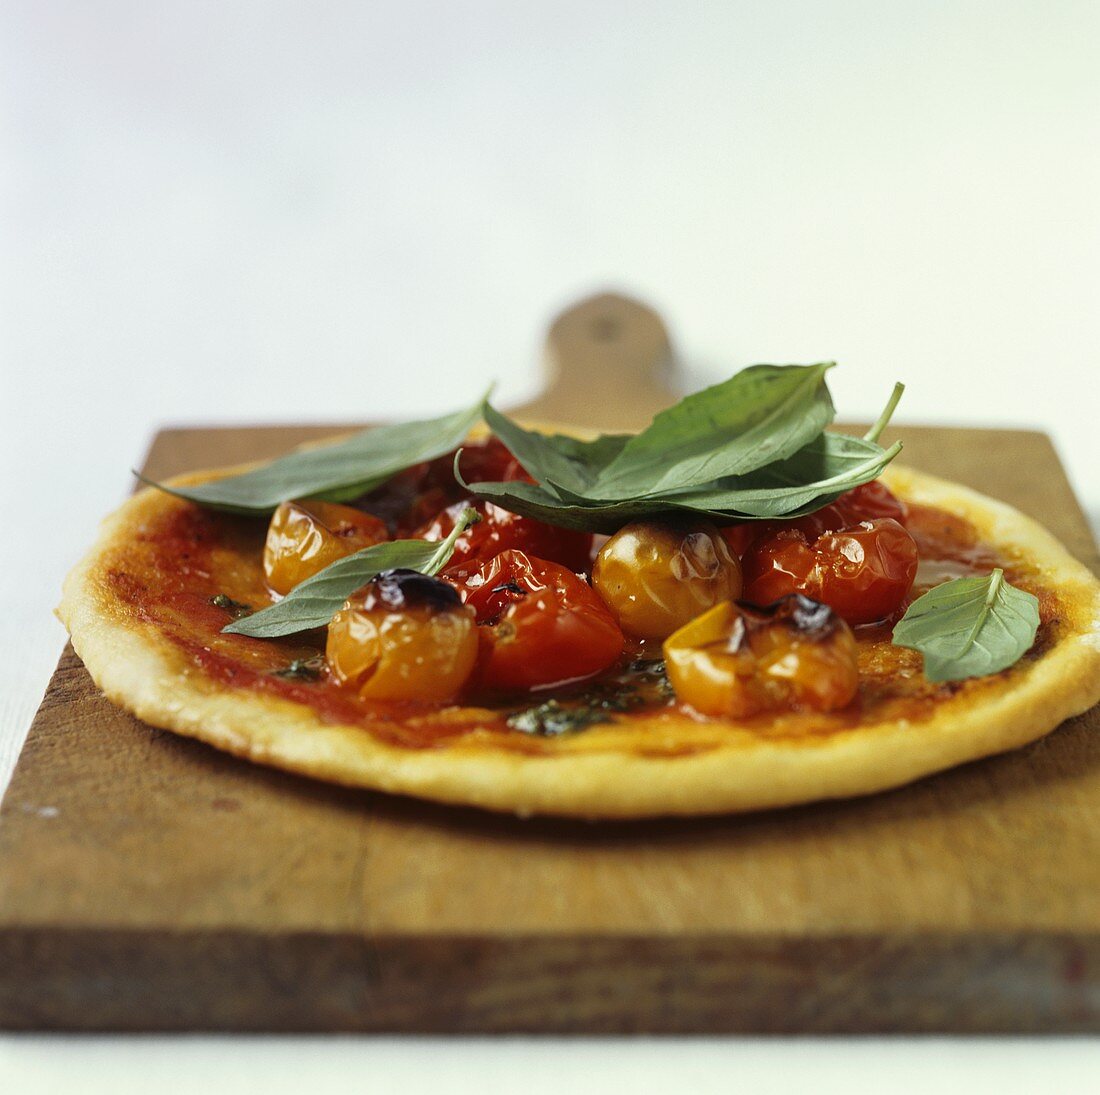 Tomato pizza with basil on a wooden board